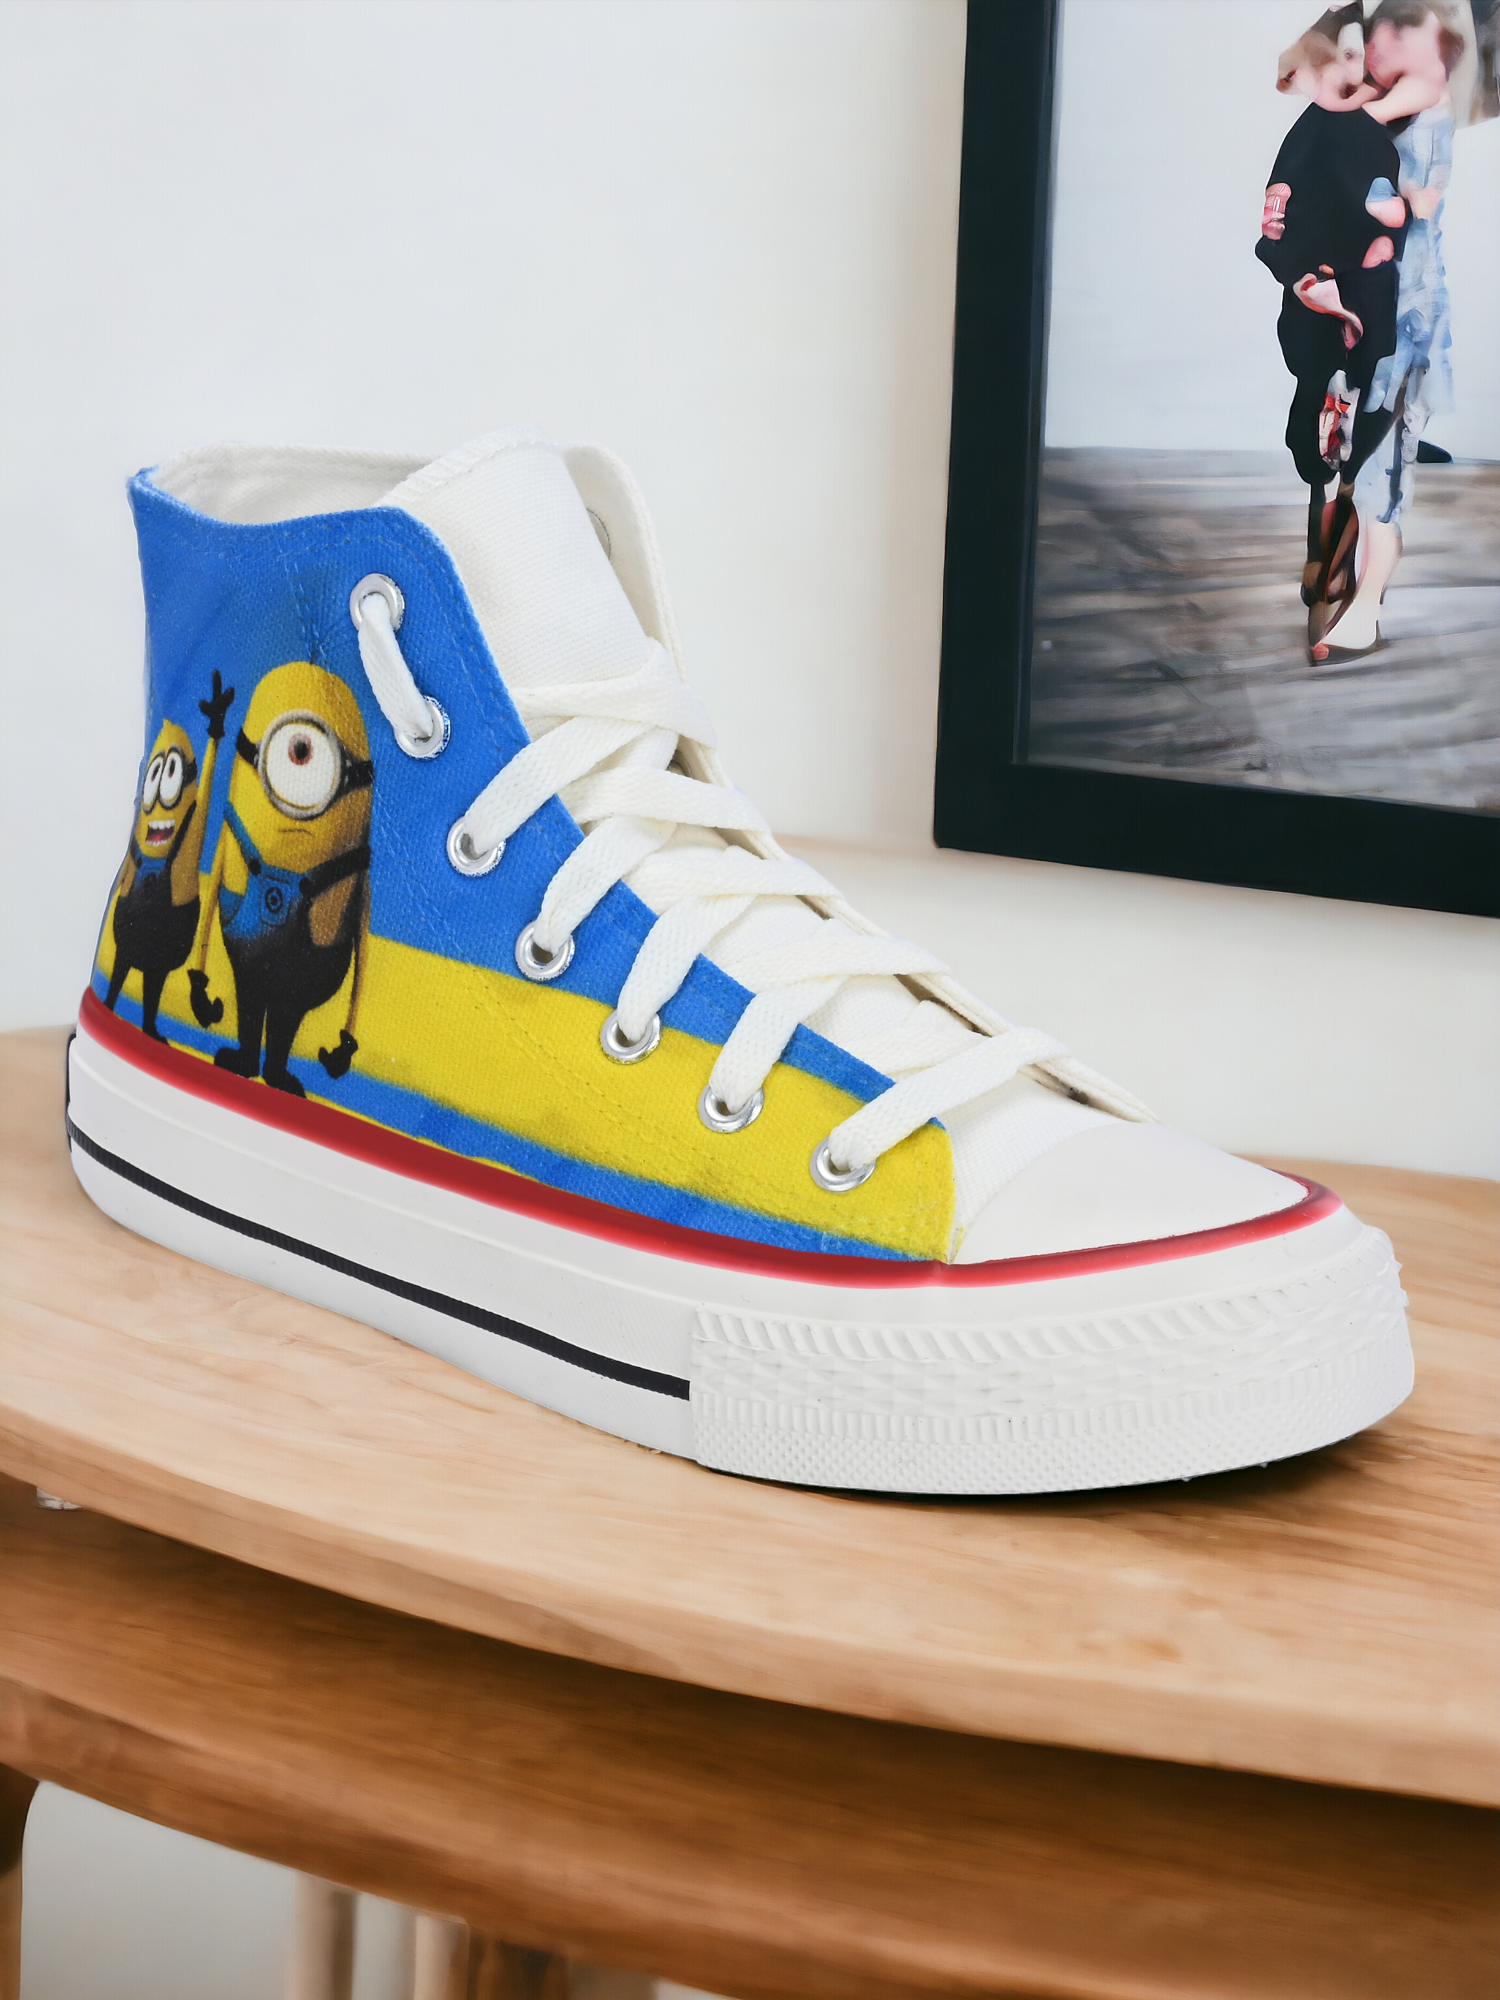 Where's My Glow? : How to make Minion canvas shoes